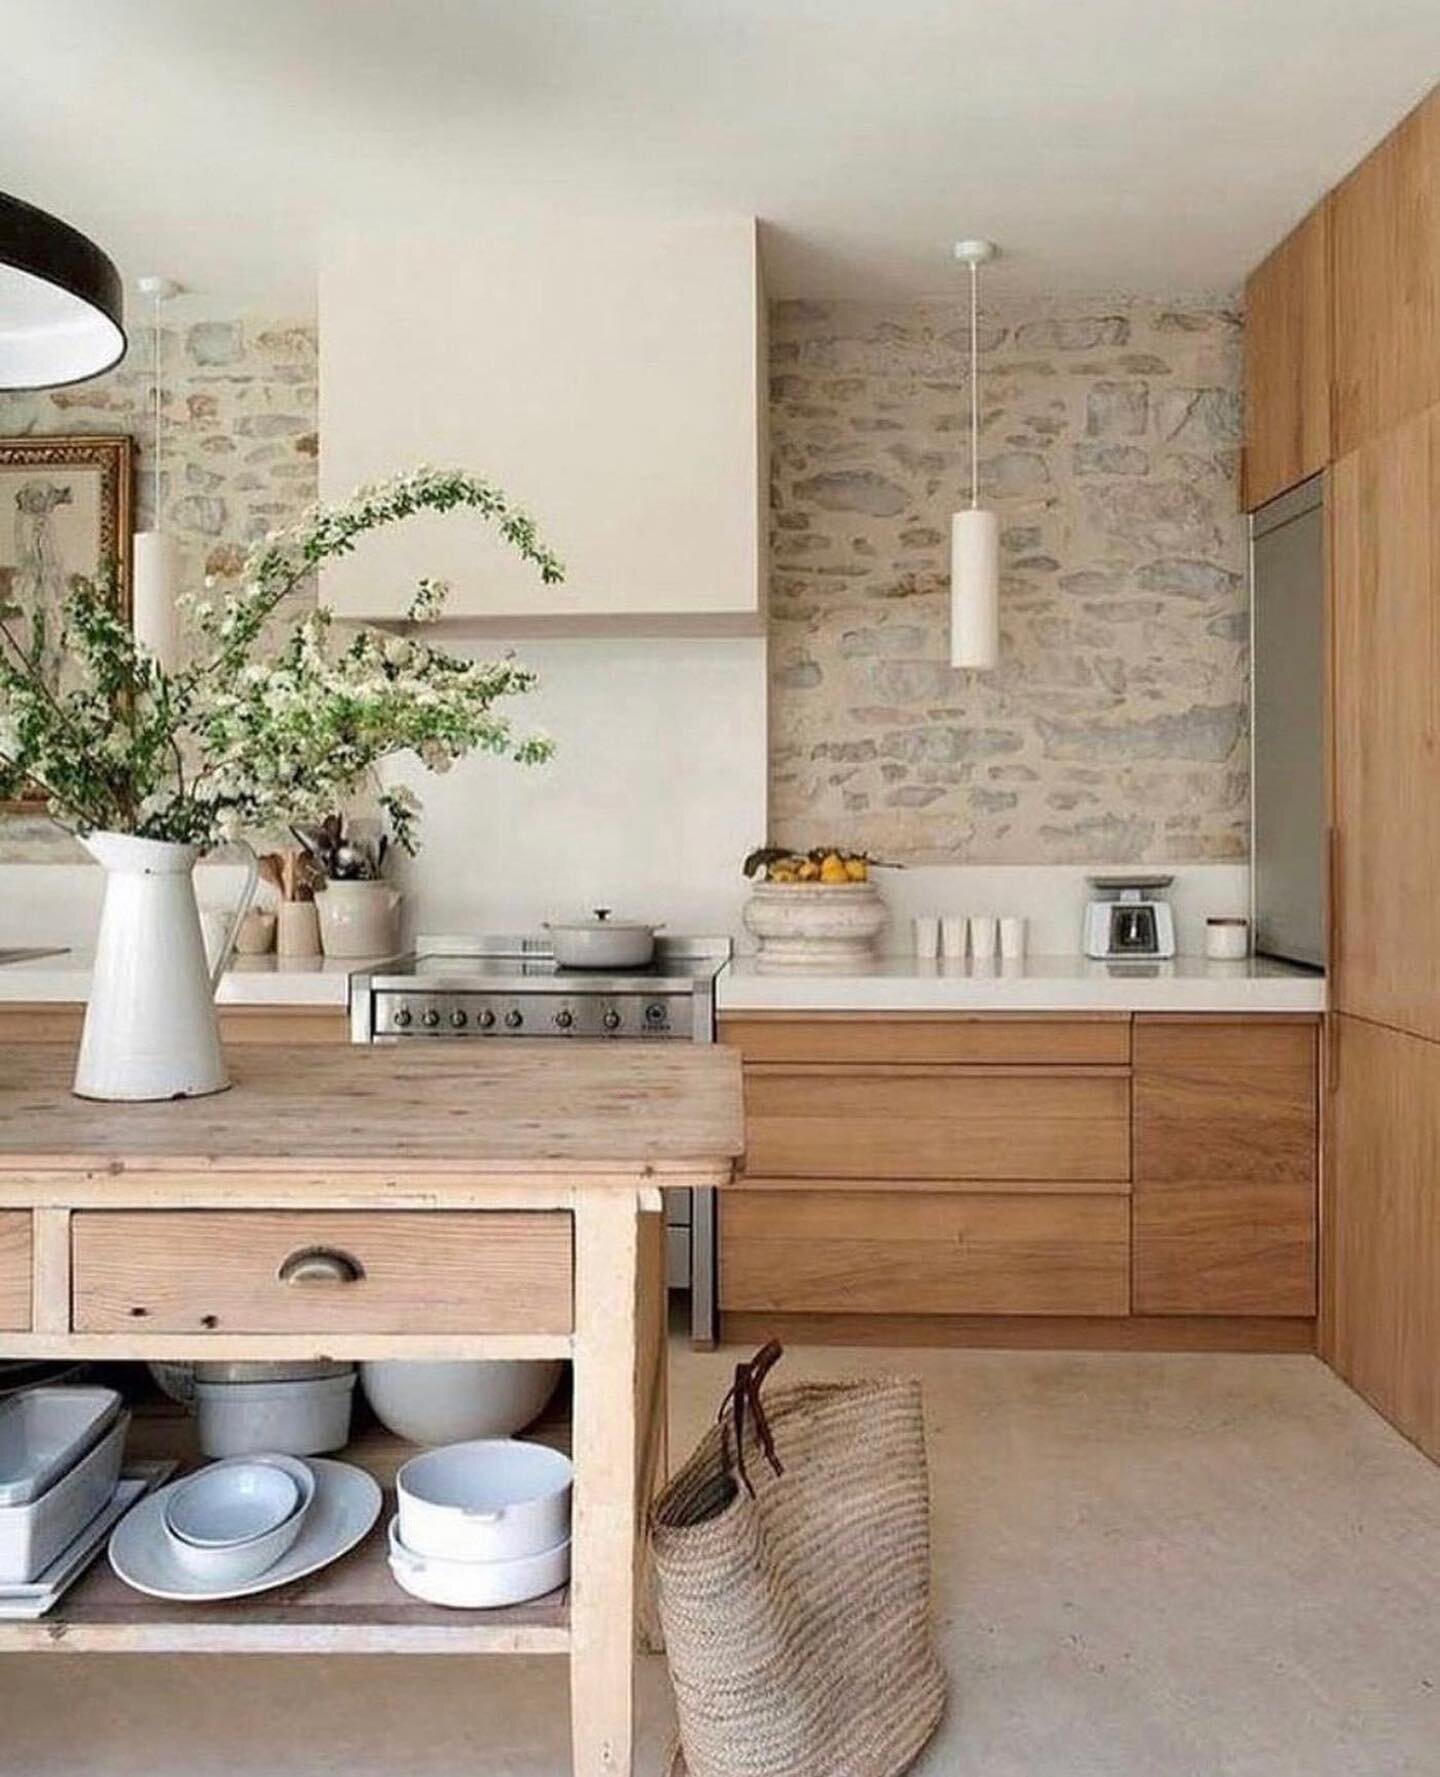 This kitchen by @mlhelmkampf is so beautiful, full of texture and hits just the right mix of modern and rustic in our opinion. Just perfect.